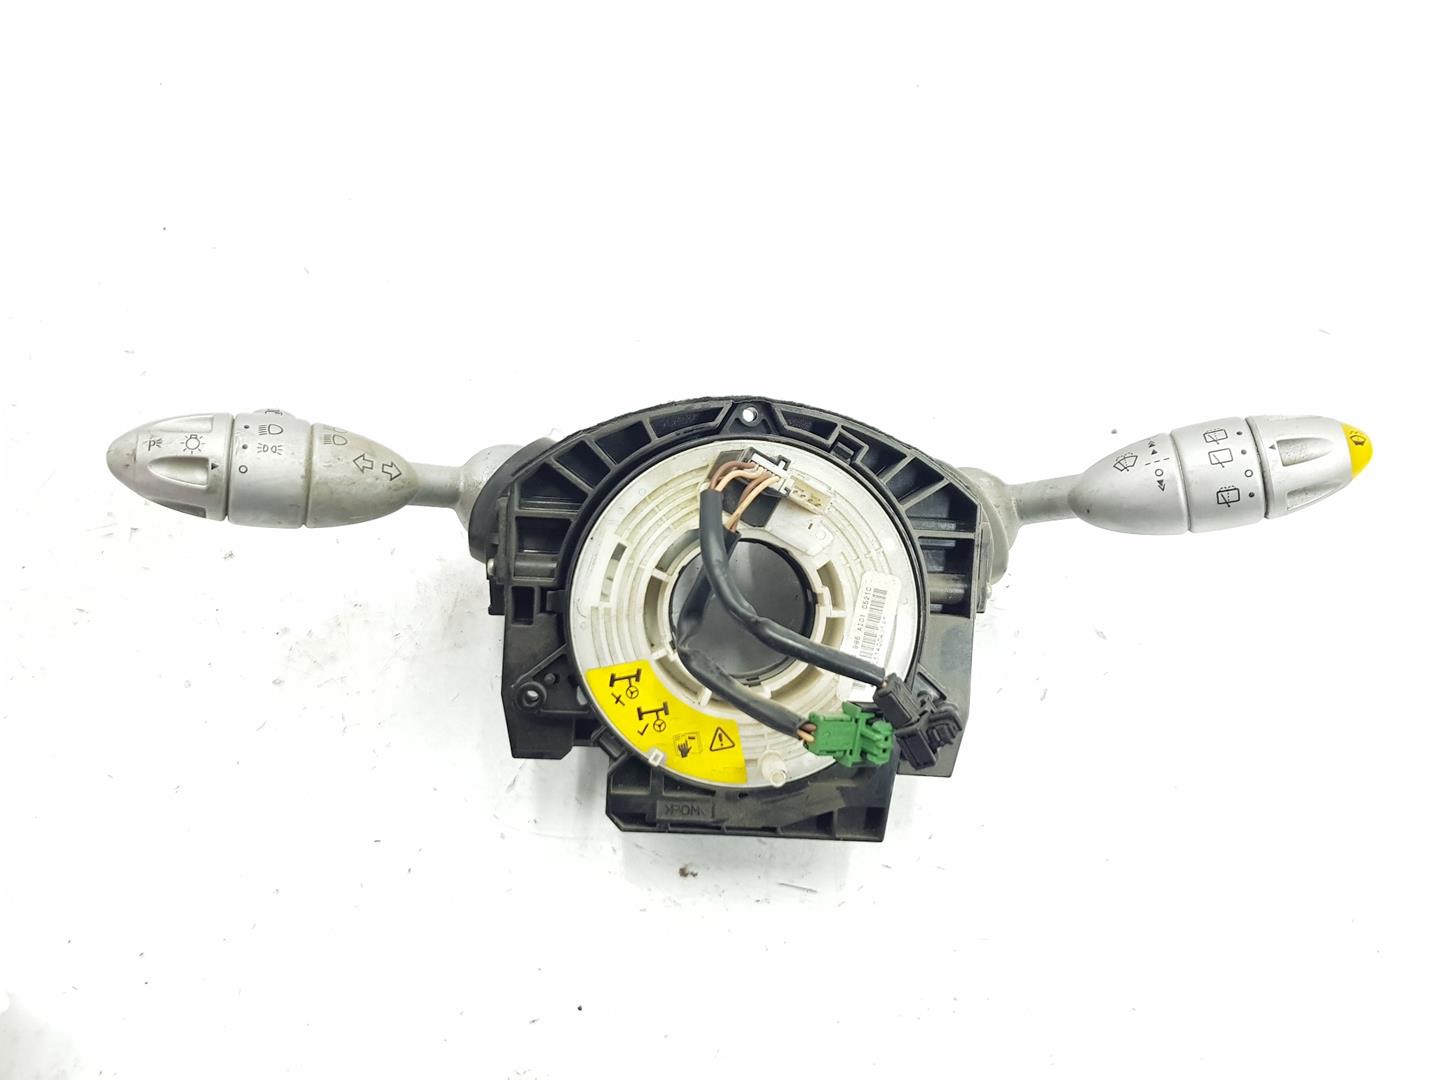 MINI Cooper R50 (2001-2006) Steering wheel buttons / switches 61316949400, 1484333, 69494116800996 19811276